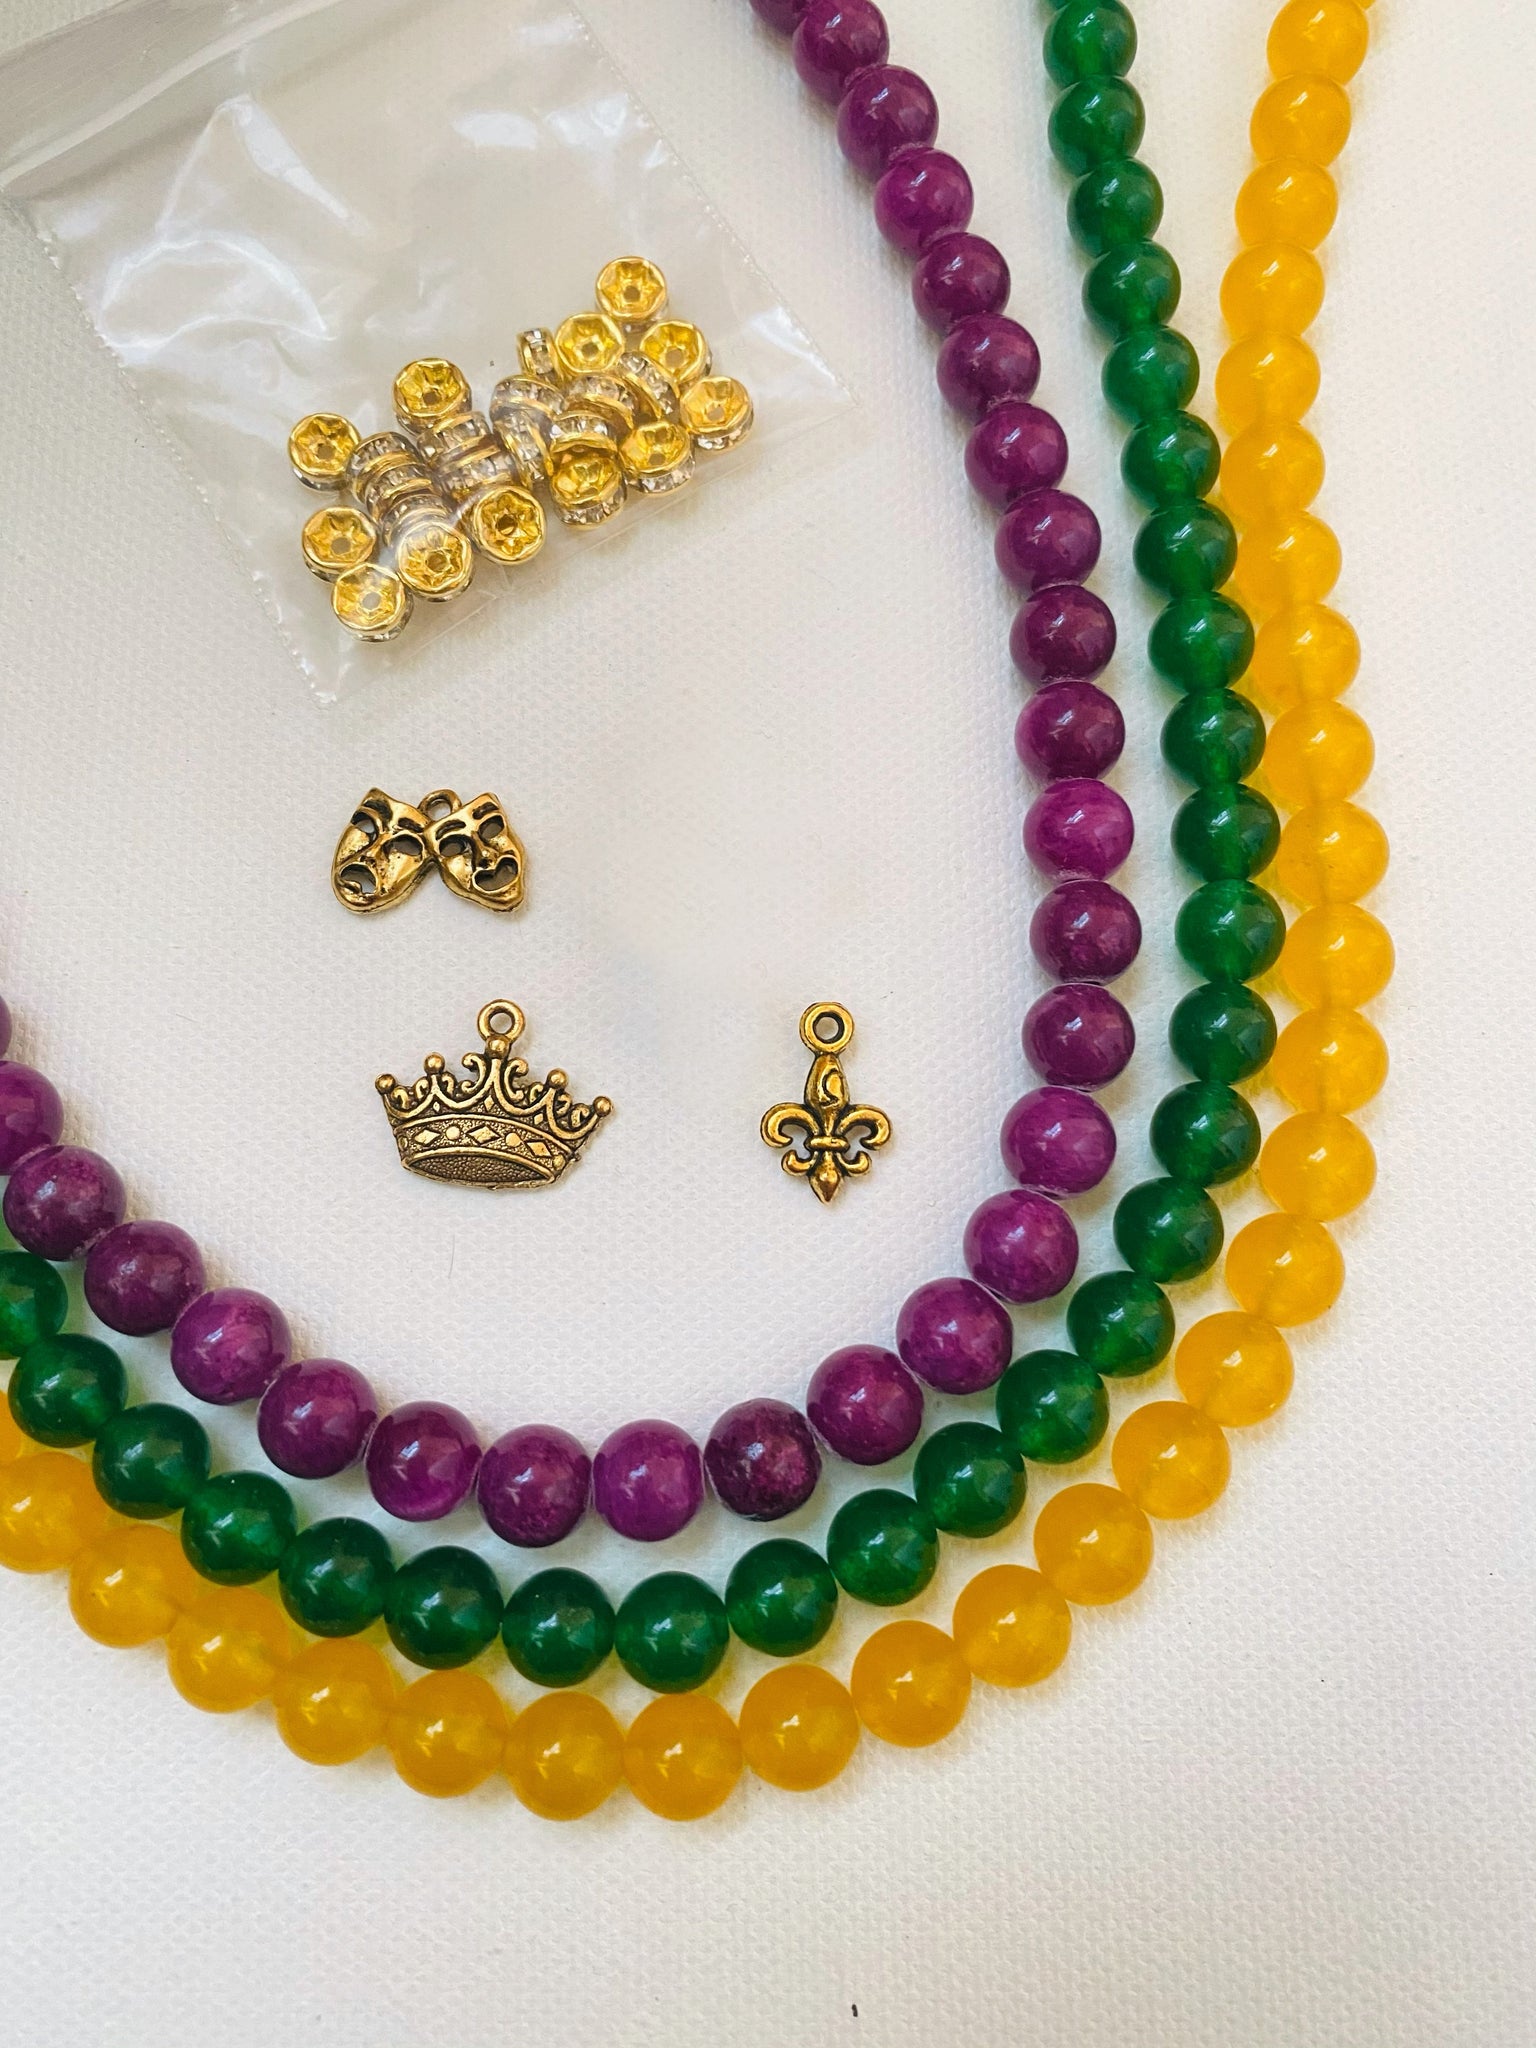 Wholesale Mardi Gras Beads and Necklaces